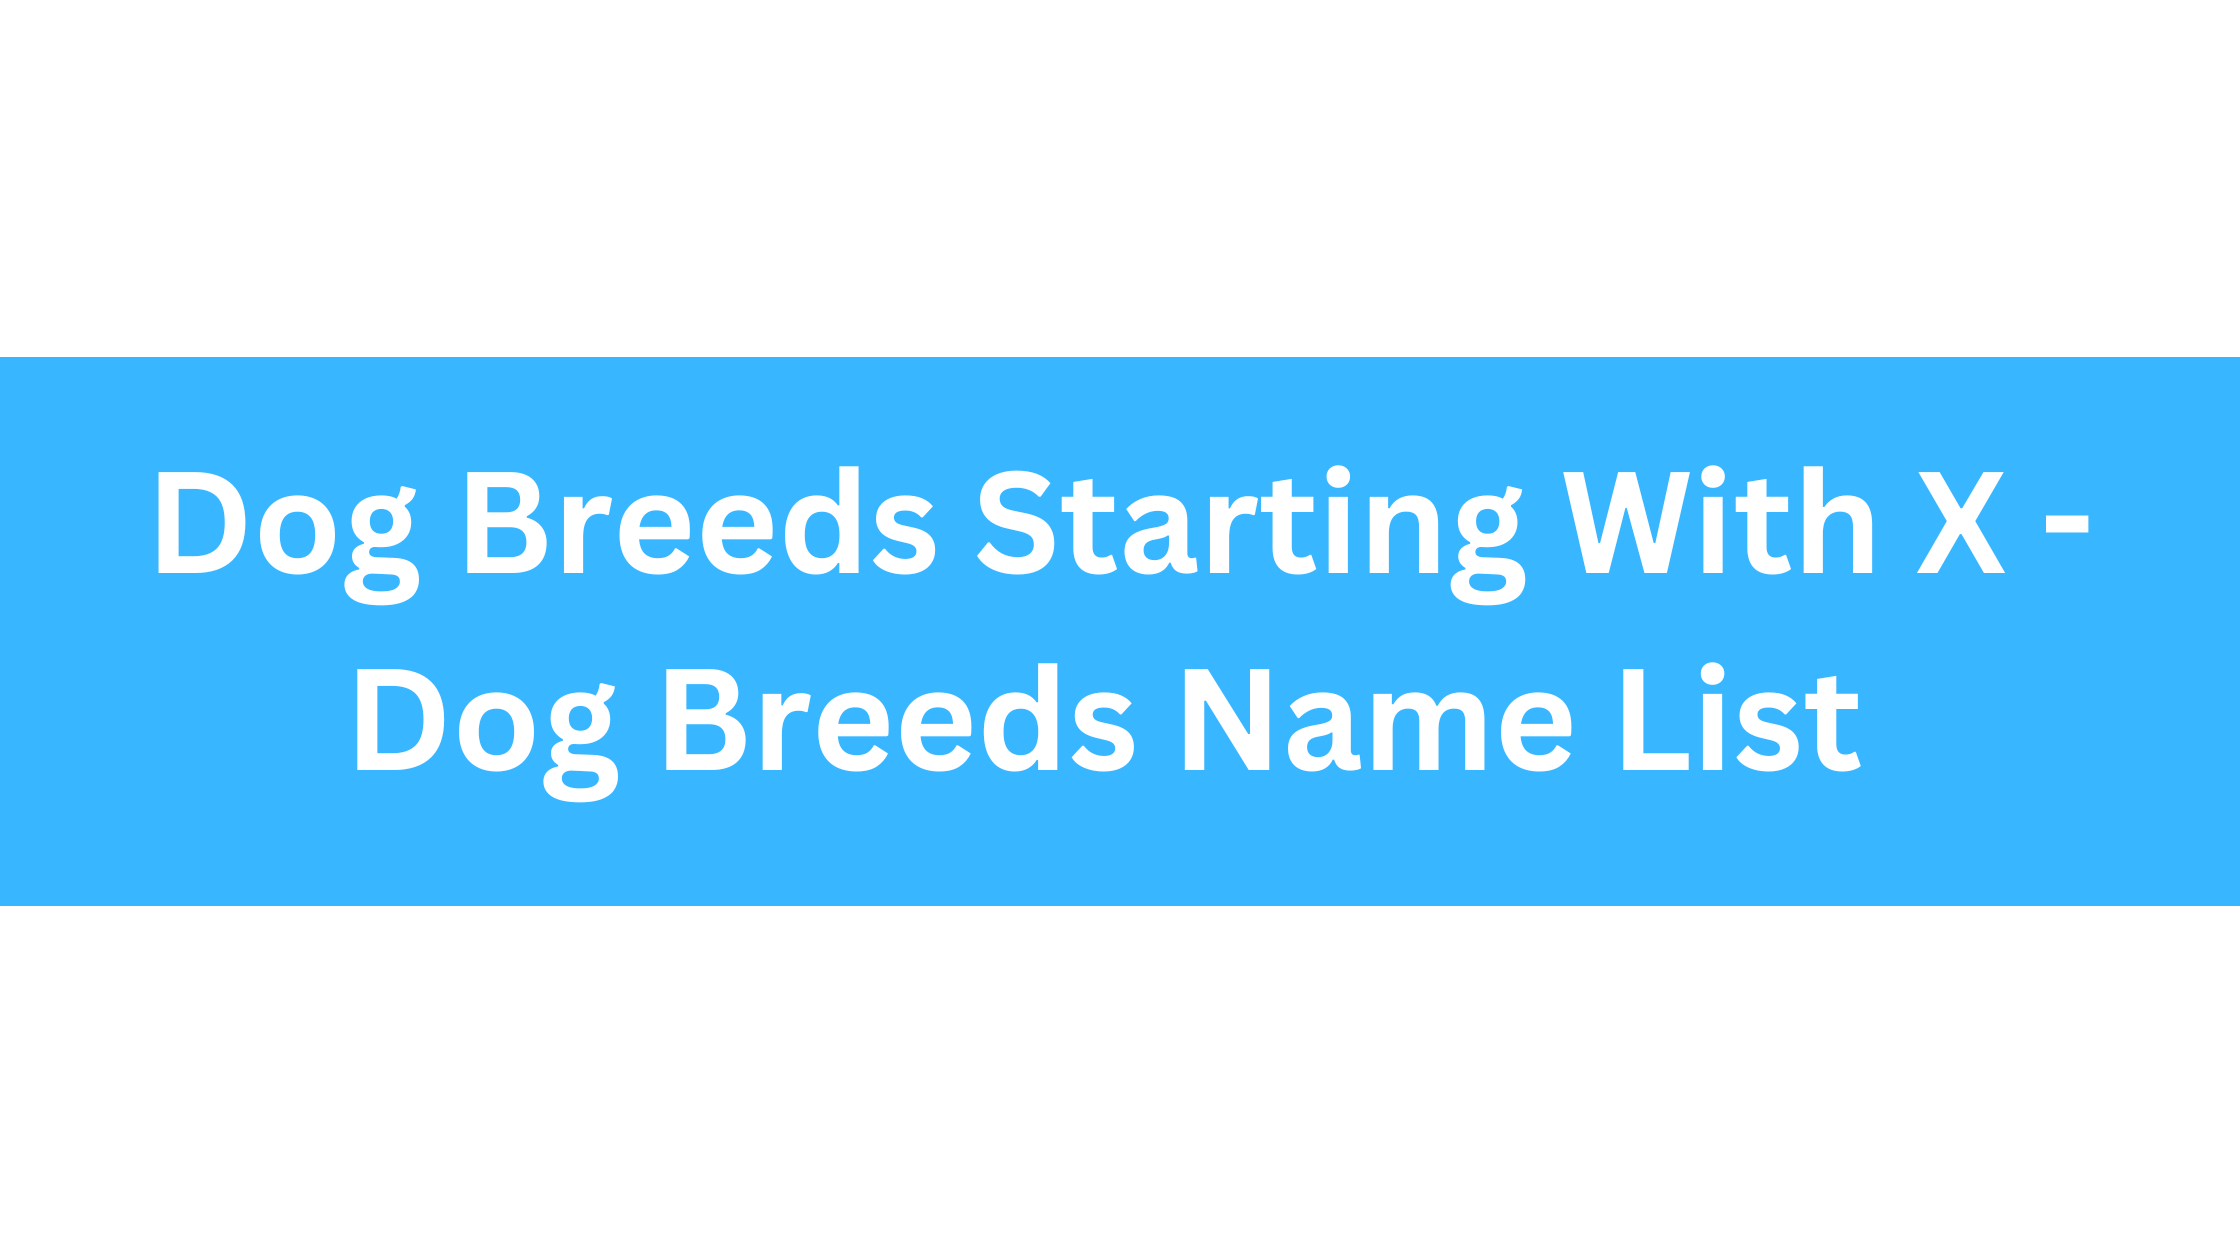 Dog Breeds Starting With X